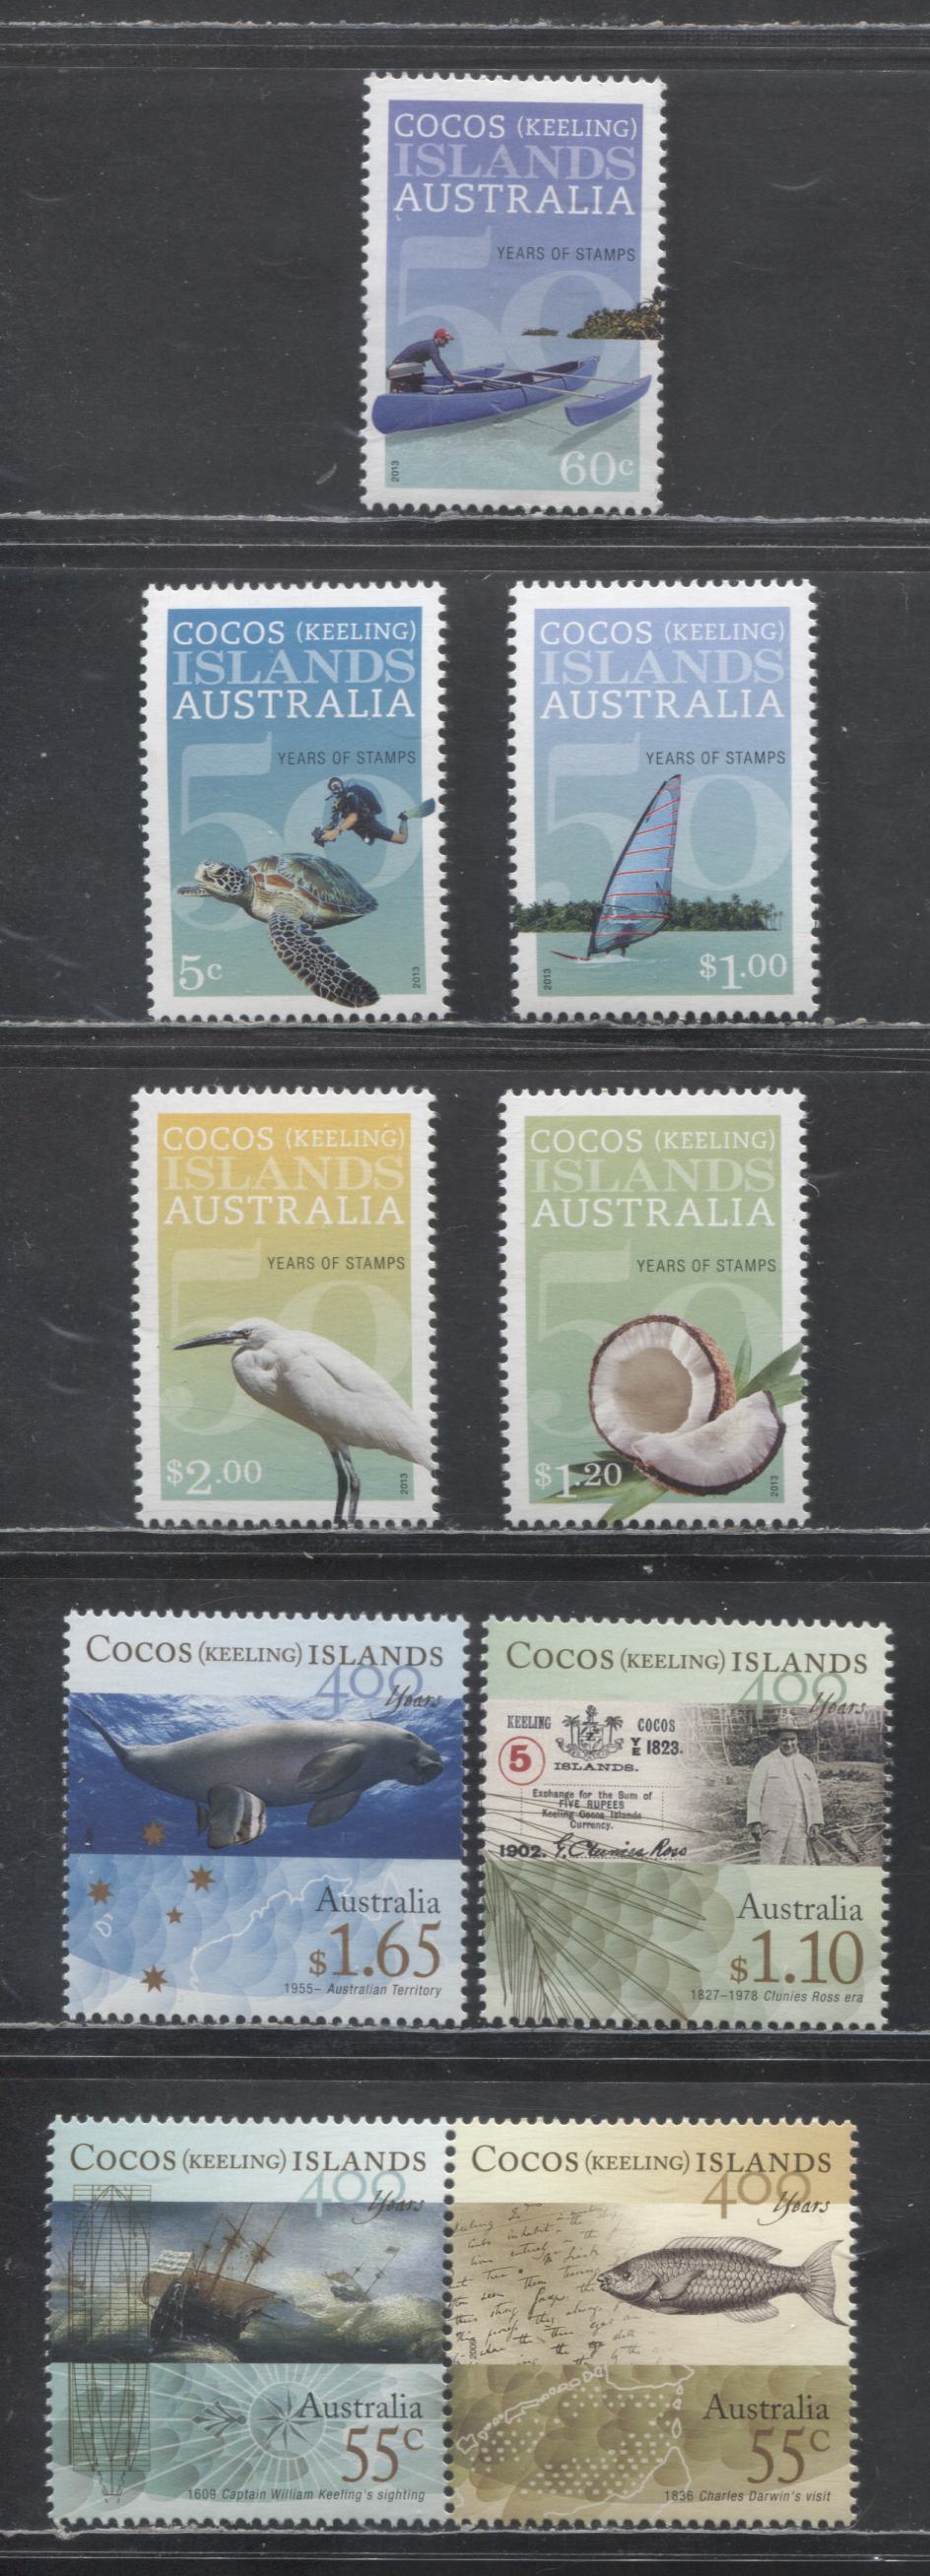 Lot 173 Cocos Islands SC#351/371 2009 History Of Cocos Islands Postage Stamps 50th Anniversary, 9 VFNH Singles, Click on Listing to See ALL Pictures, 2017 Scott Cat. $21.75